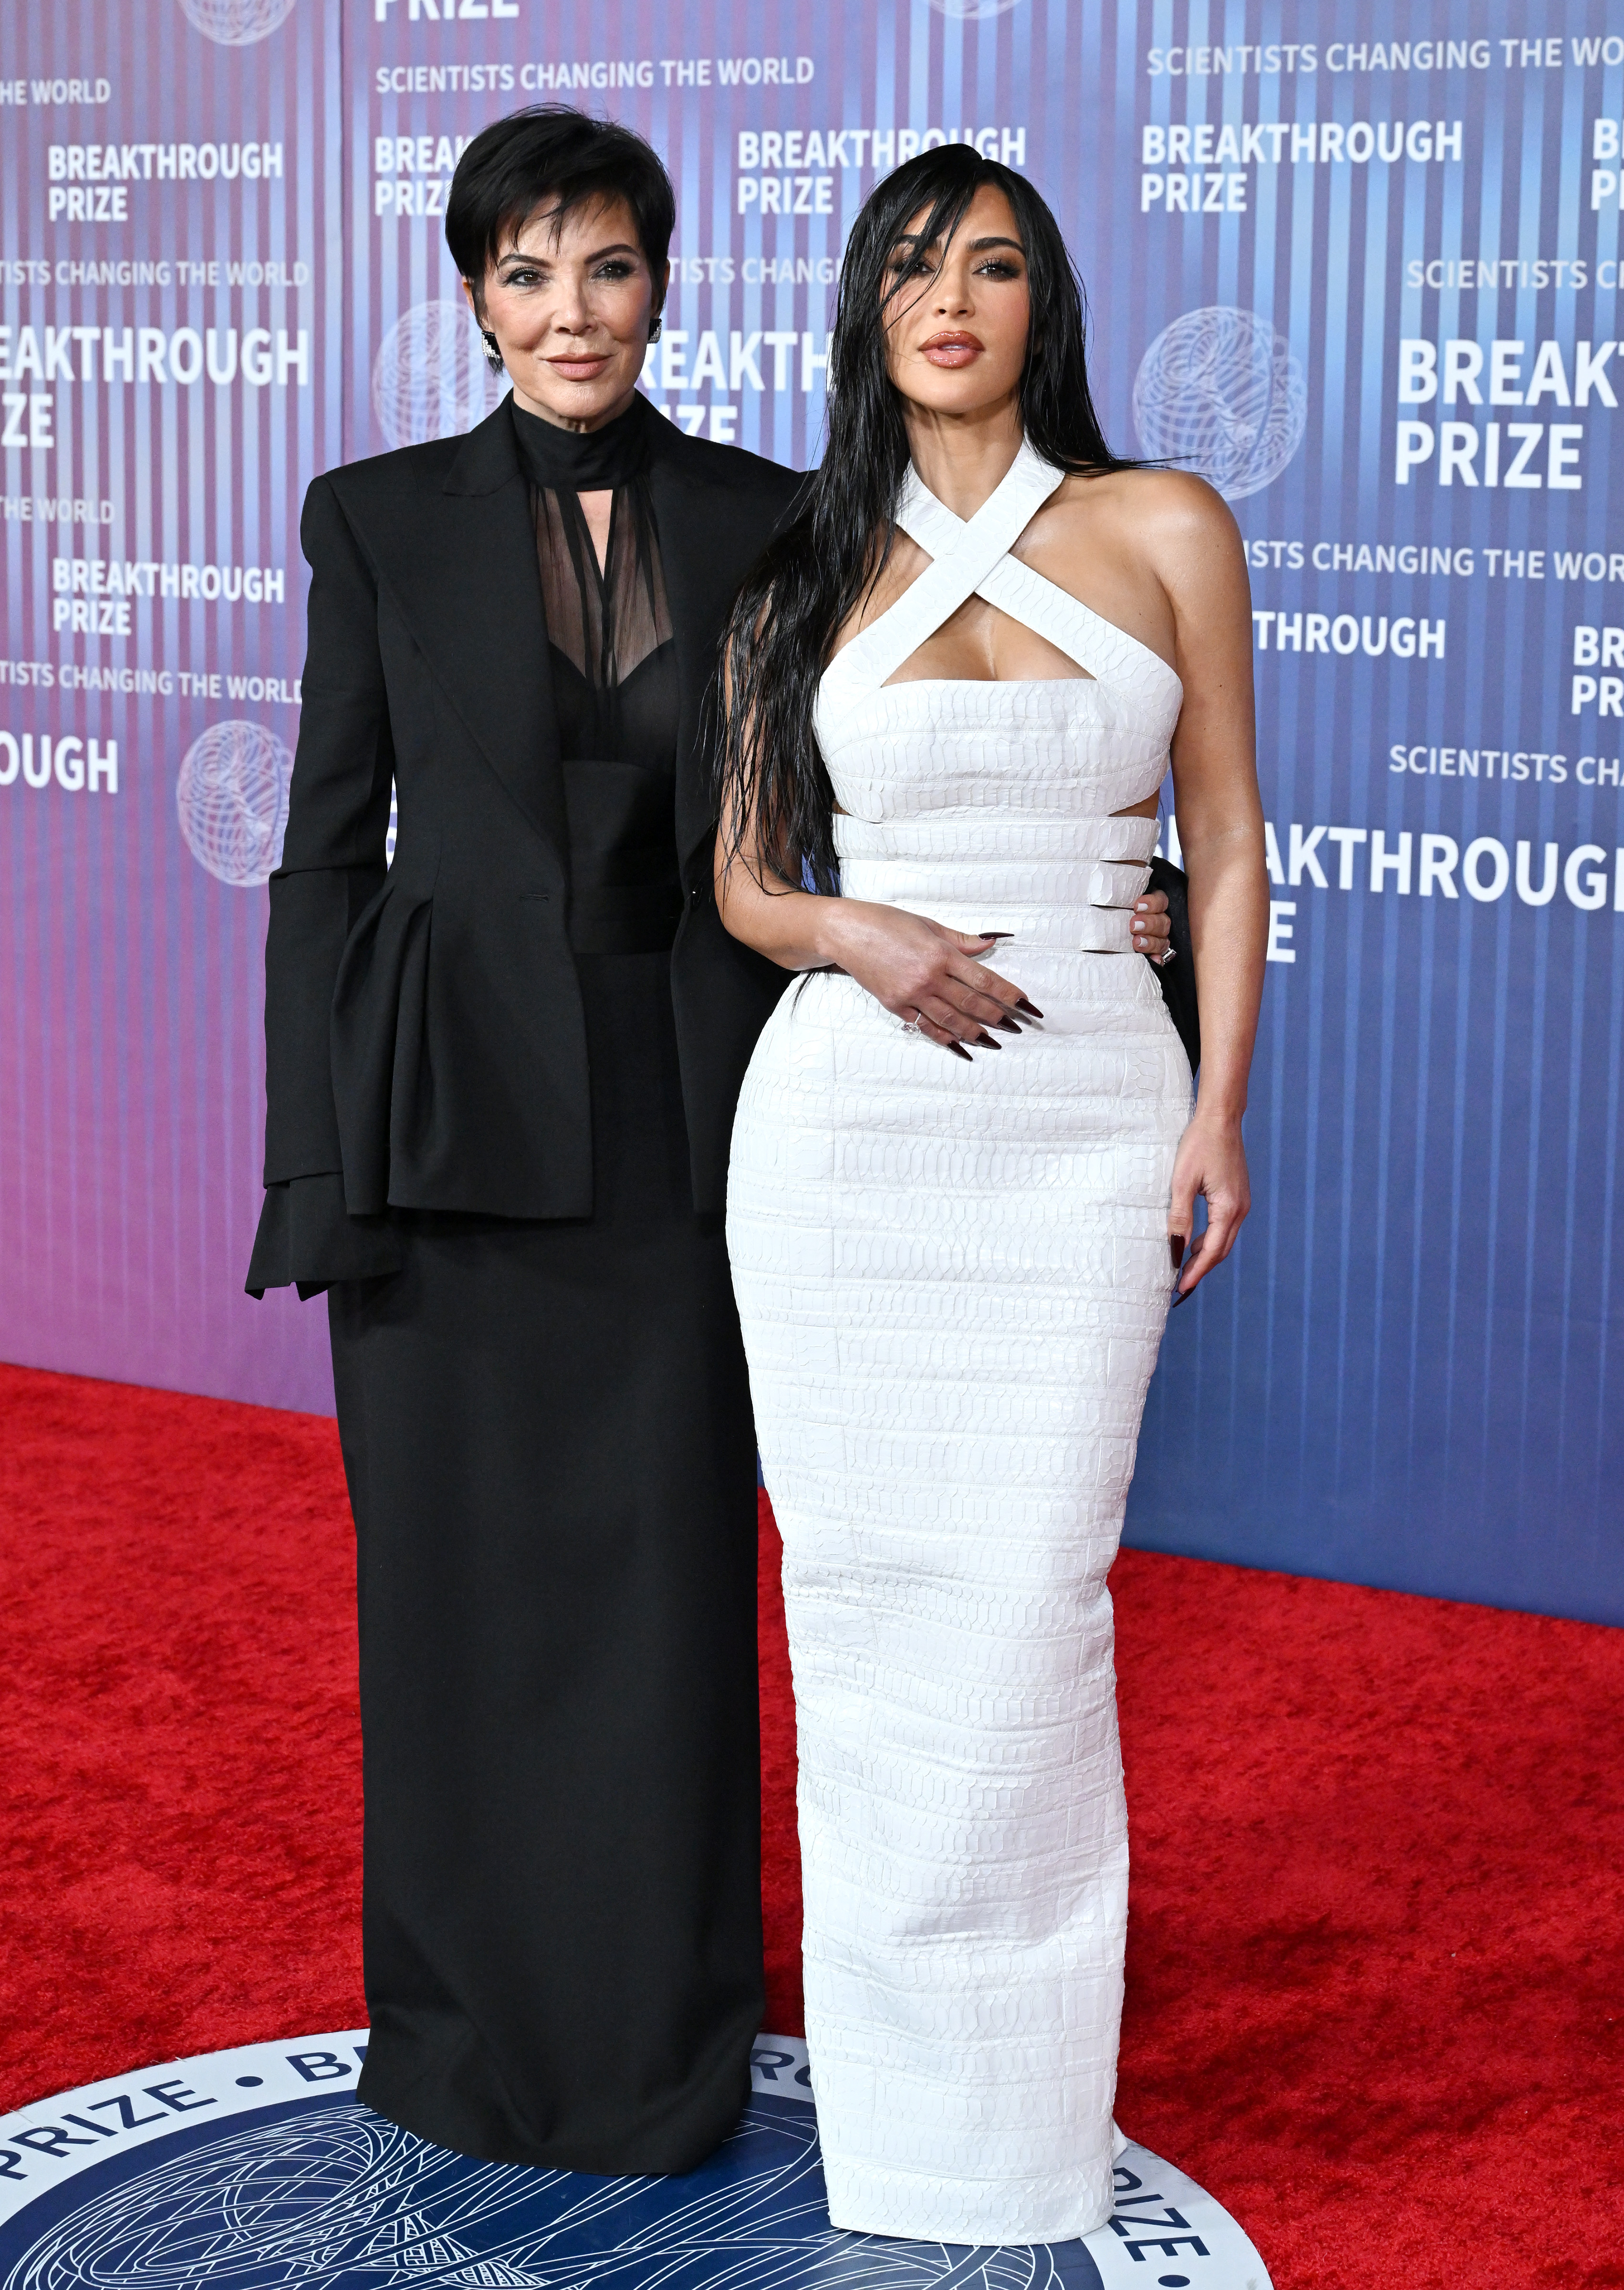 Kim opted for a damp-looking hairstyle with bangs that swept across her forehead as she and her mom posed on the gala's red carpet